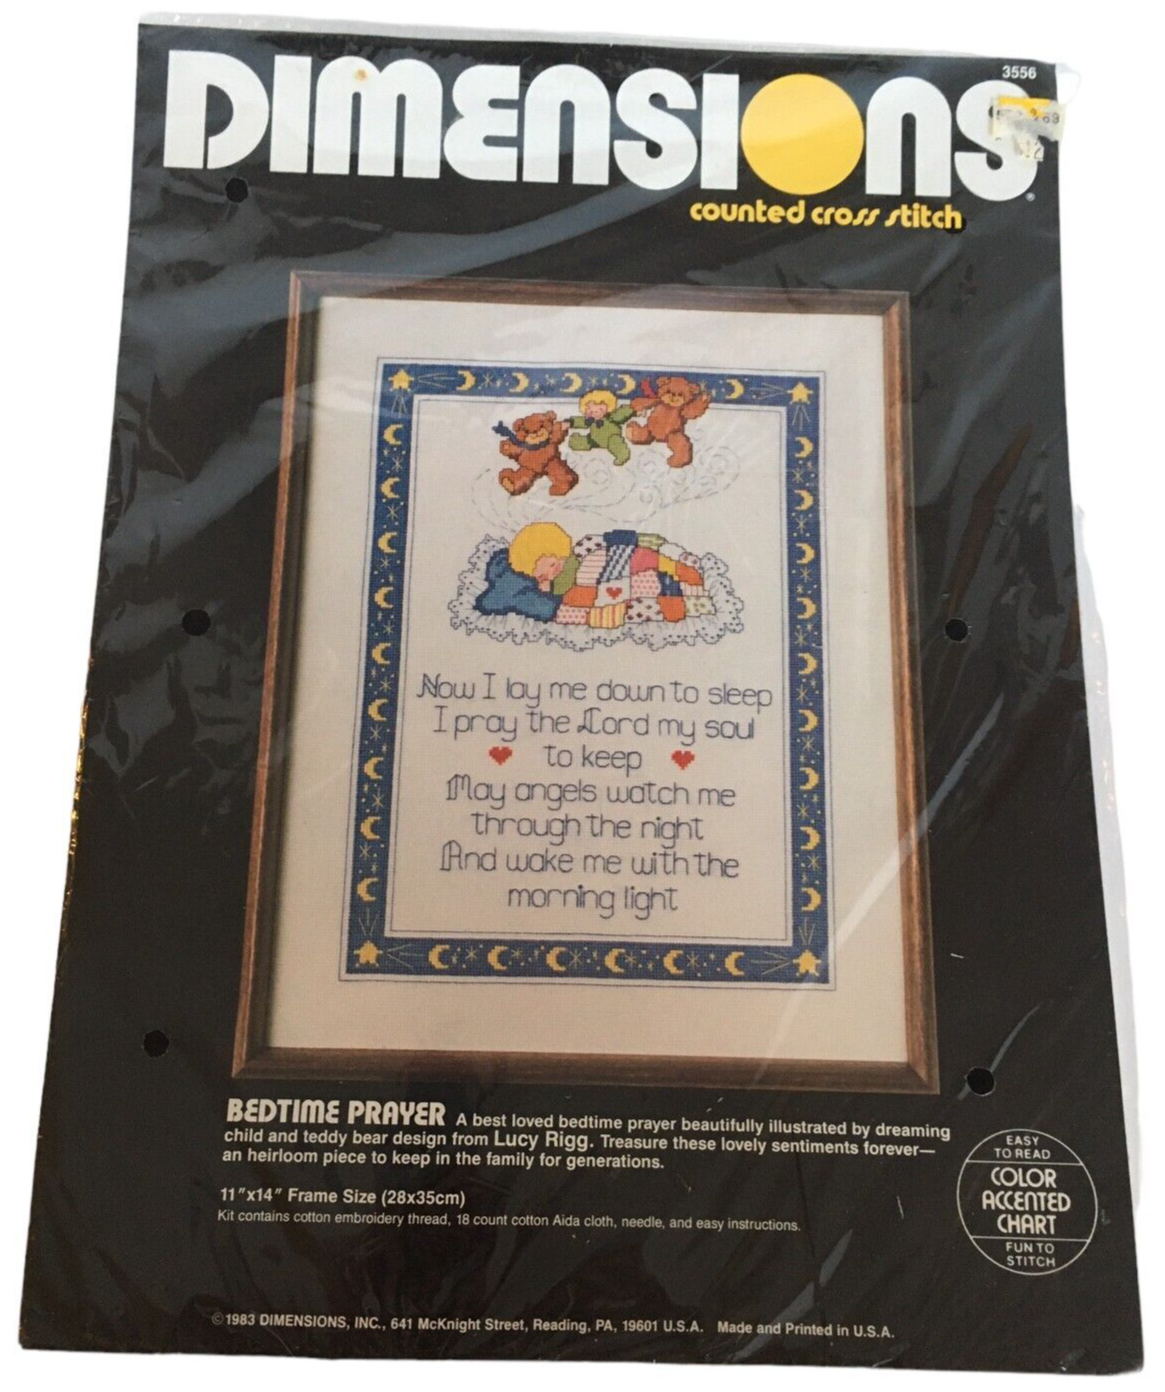 Primary image for Dimensions Counted Cross Stitch Kit Bedtime Prayer Dreaming Child Teddy Bear Vtg